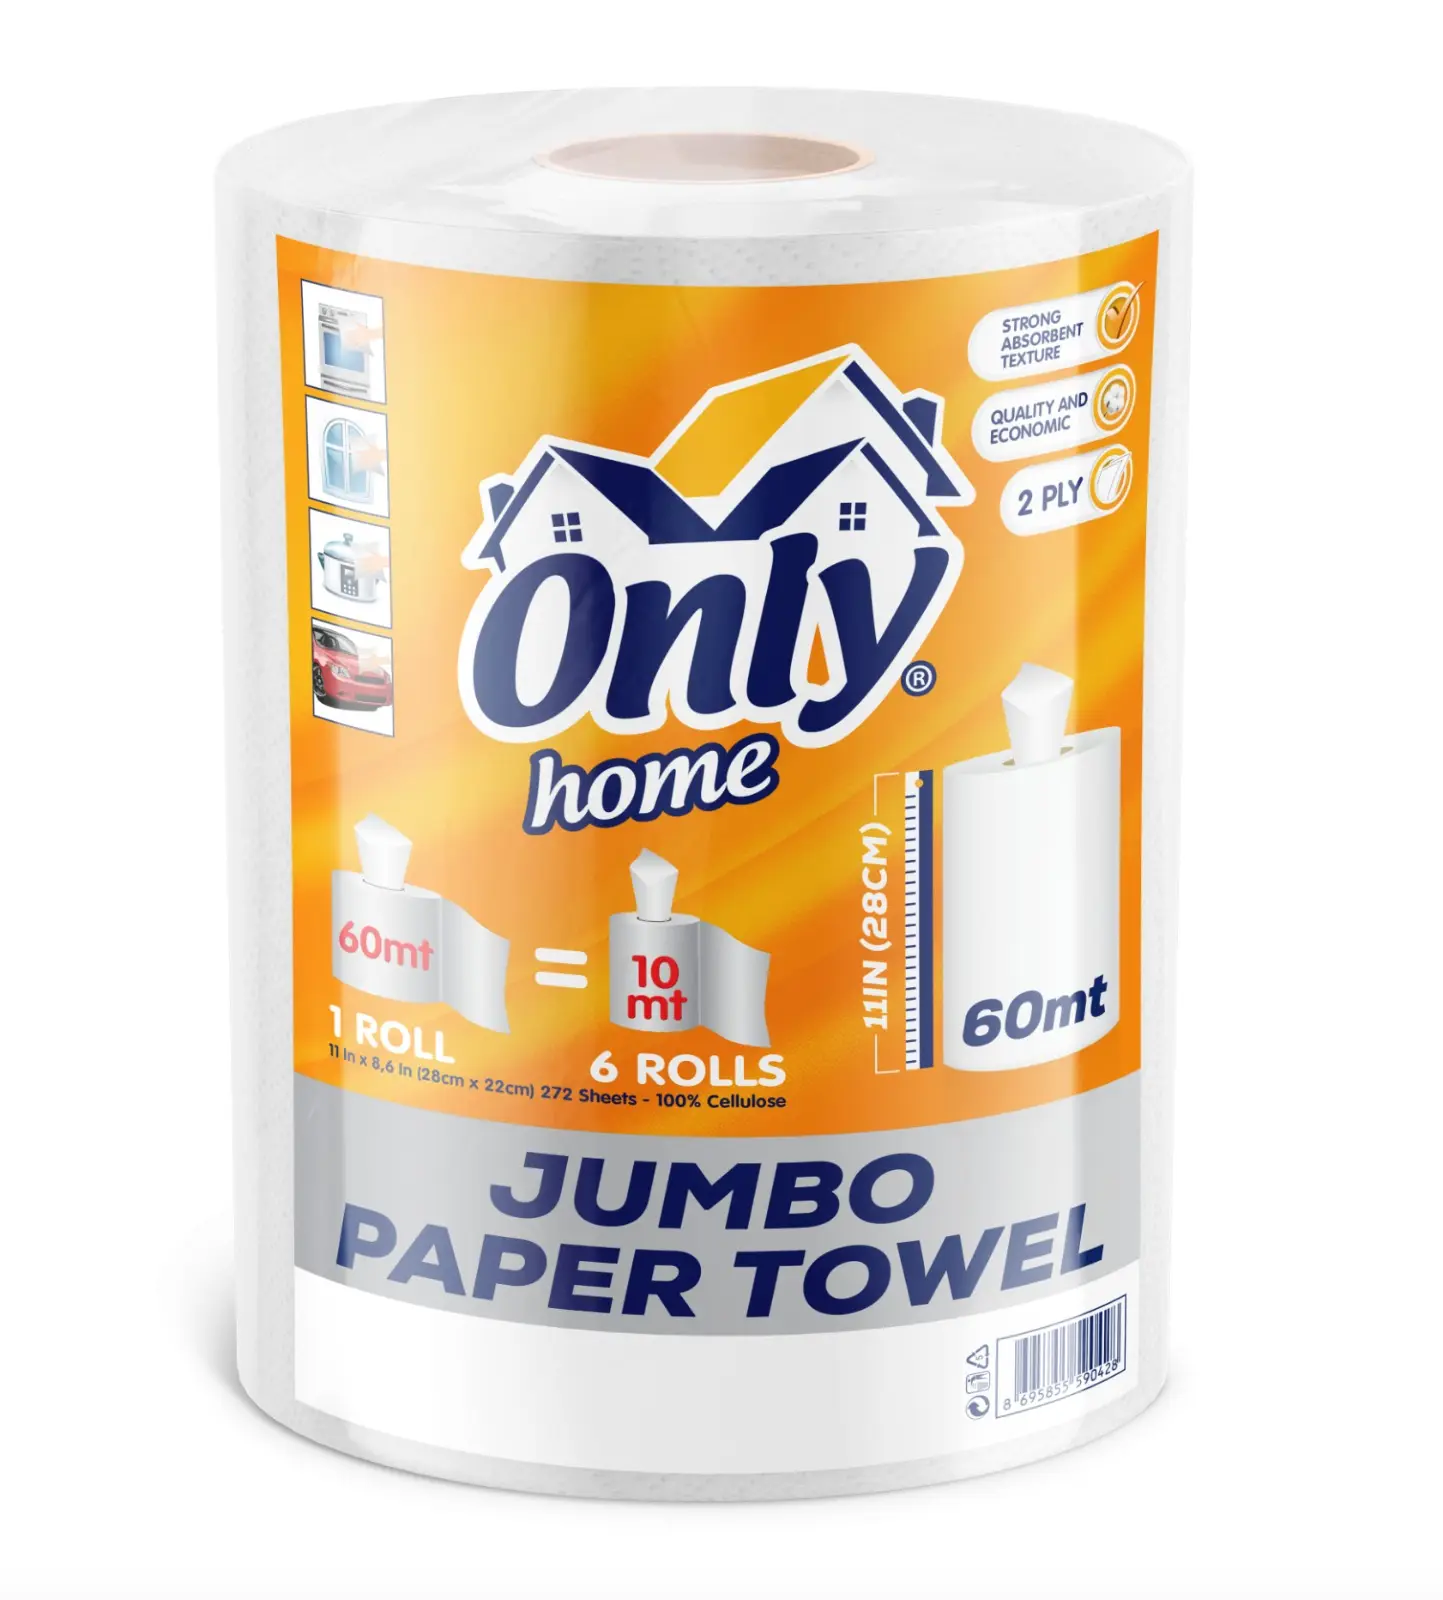 Cheapest Jumbo Roll Tissue Paper for Diapers and Napkins